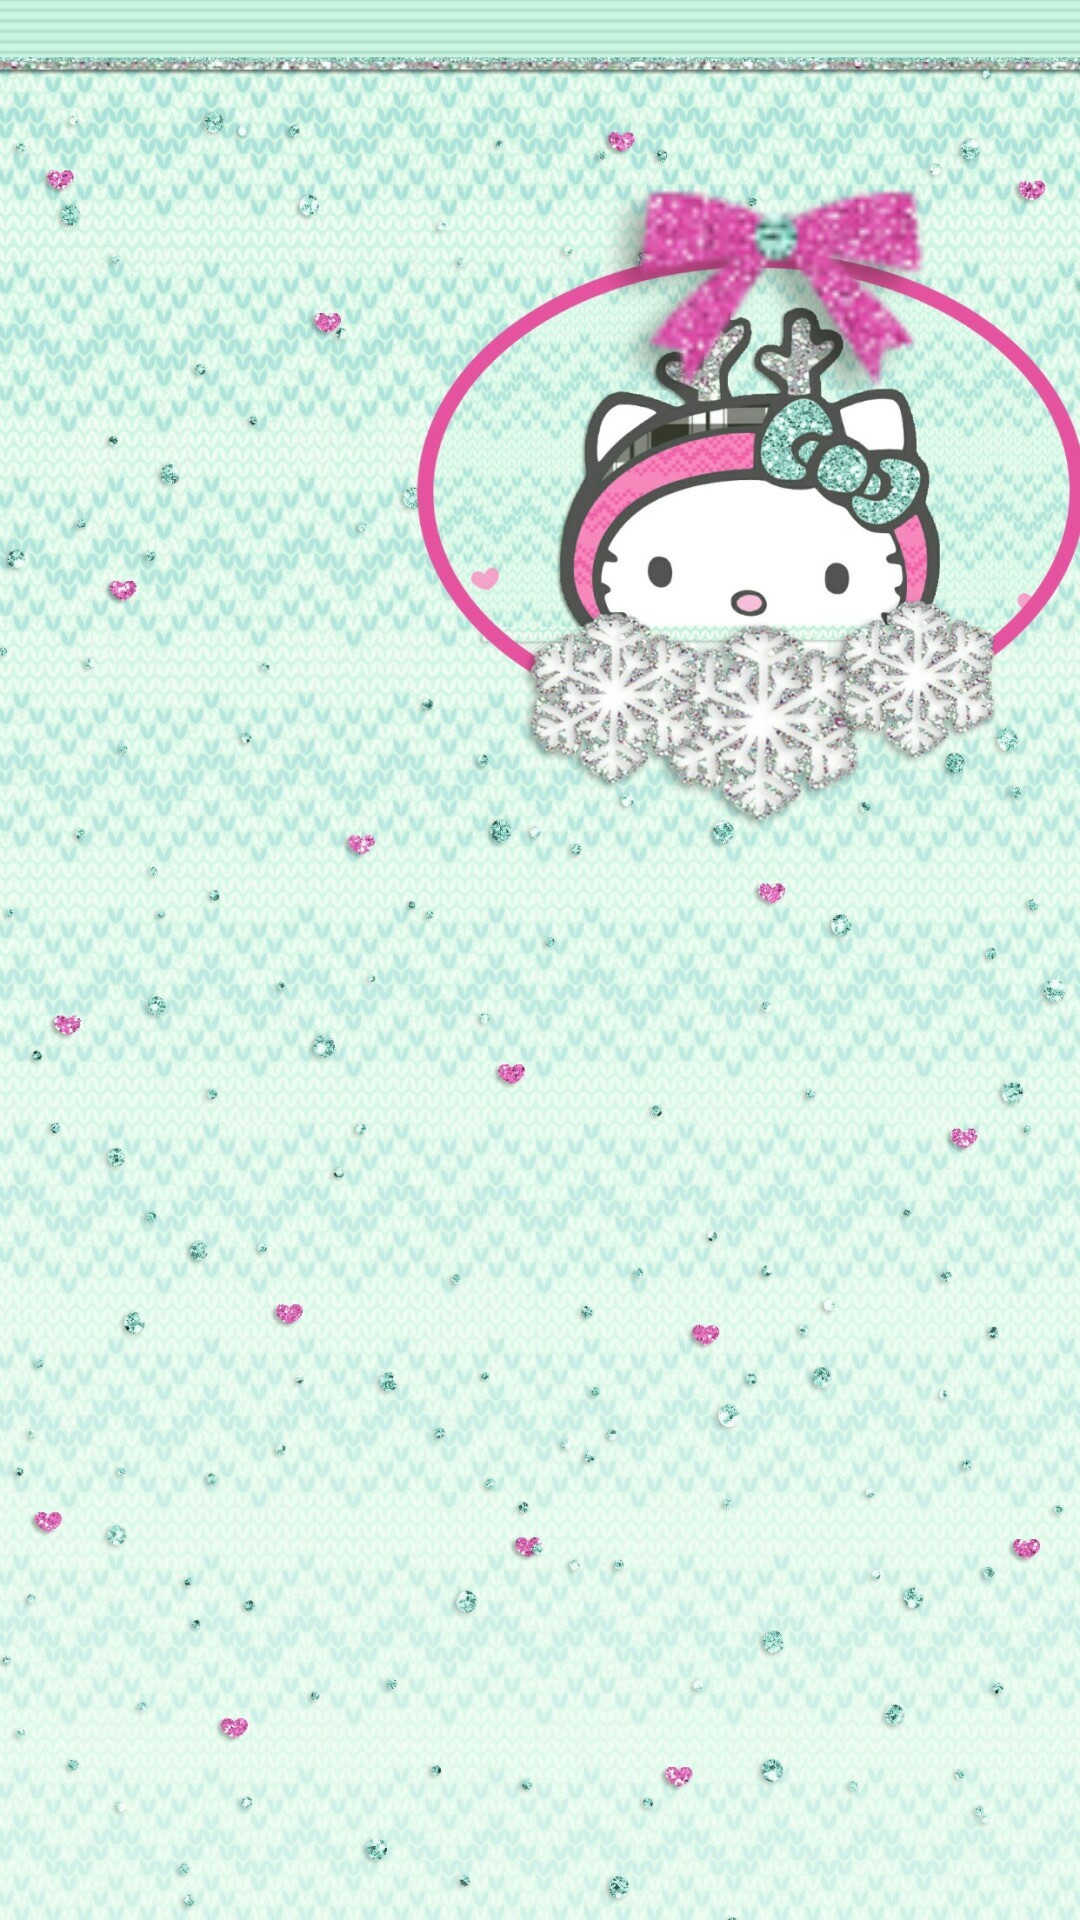 1080x1920 Hello Kitty Wallpaper, Wallpaper Backgrounds, Phone Wallpapers, Christmas  Holidays, Screen, Wallpapers, Funds, Paper